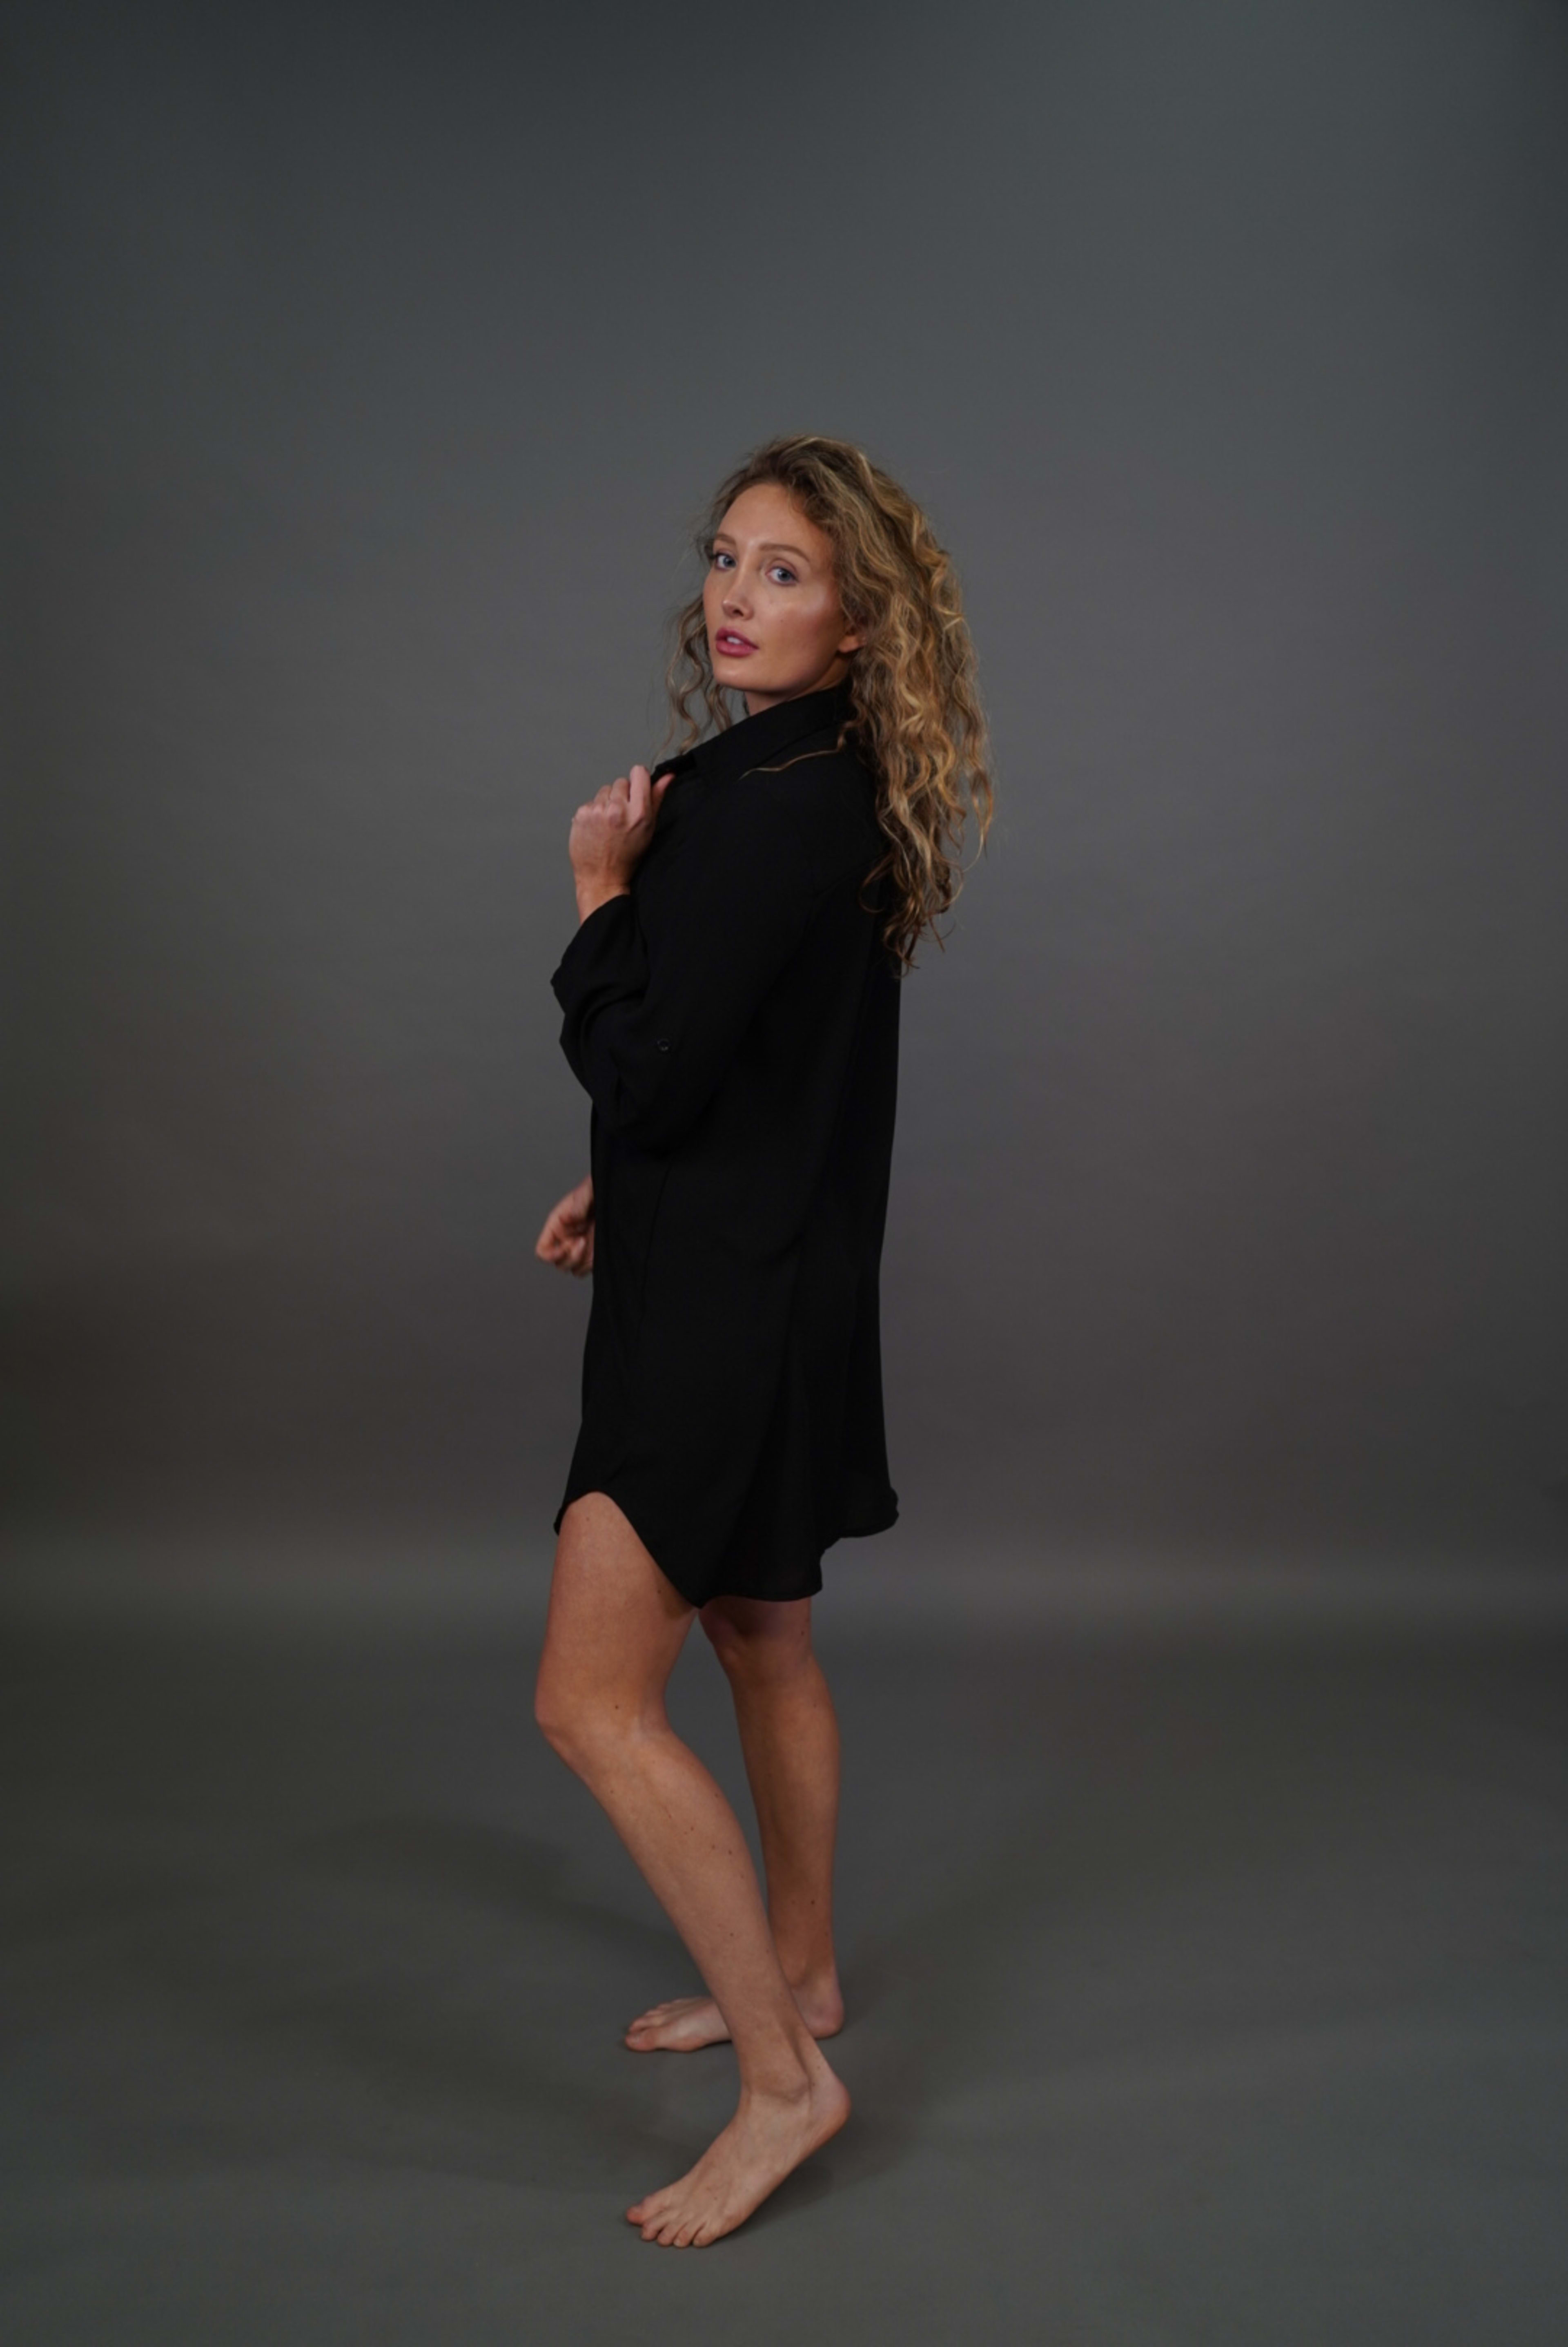 A woman in a long black shirt posing for a minimalist photo shoot.